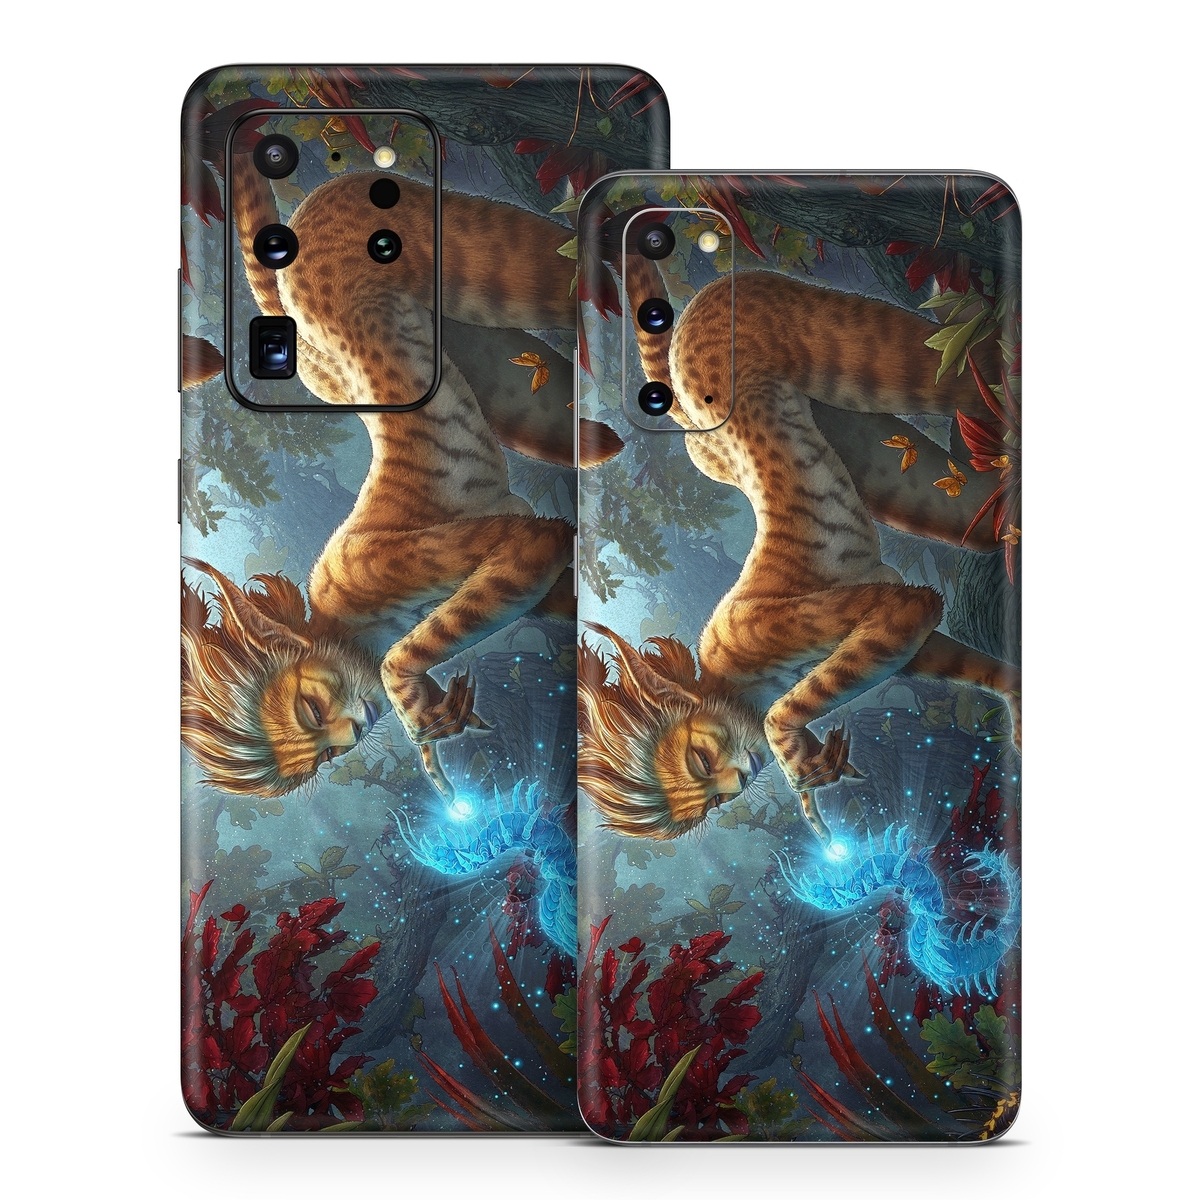 Samsung Galaxy S20 Series Skin design of Fictional character, Mythology, Illustration, Cg artwork, Sky, Organism, Dragon, Felidae, Mythical creature, Art, with yellow, red, black, green, blue colors